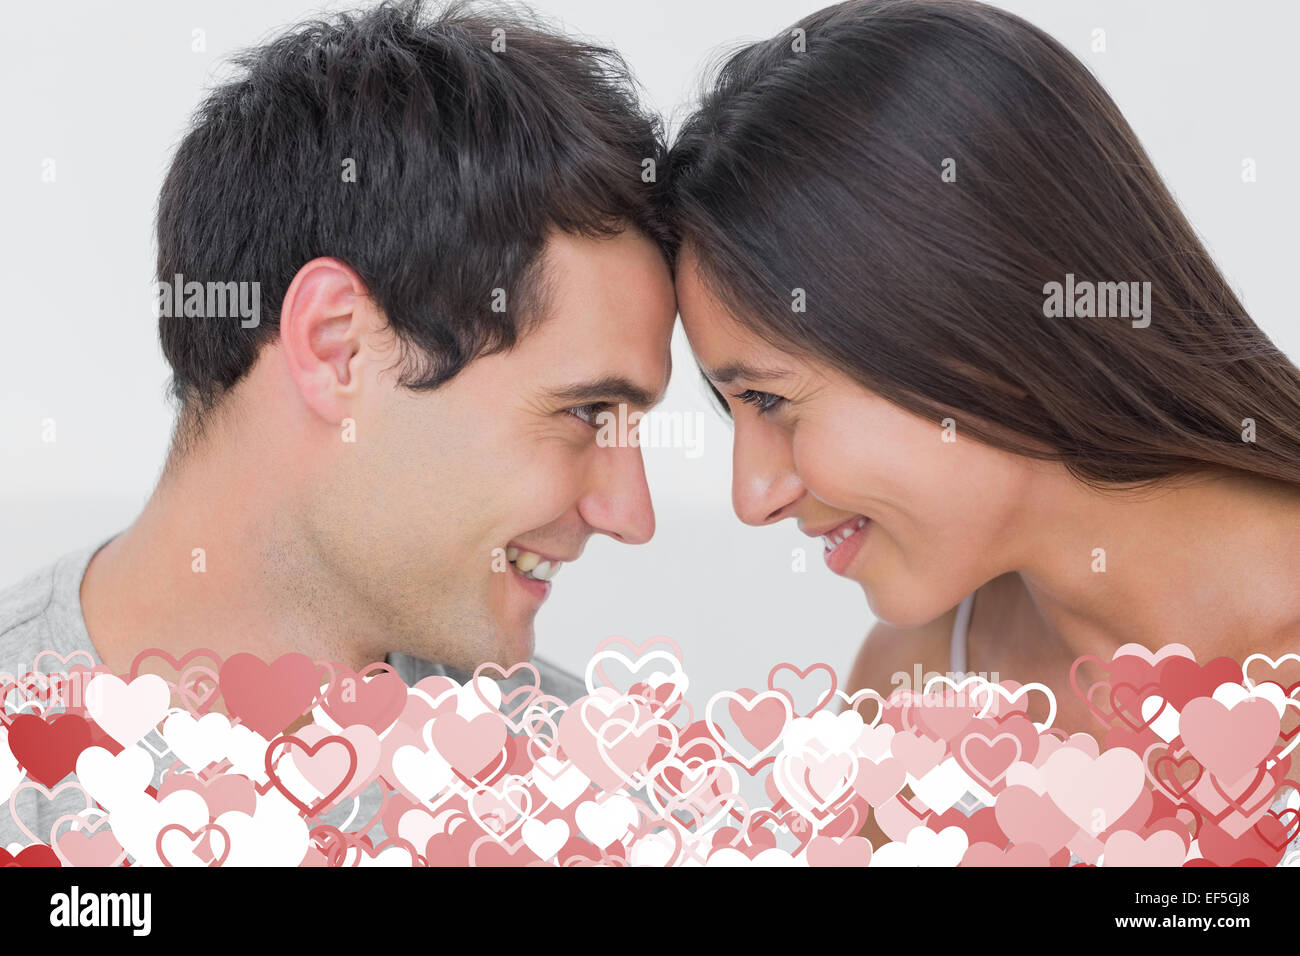 Composite image of couple facing each other Stock Photo